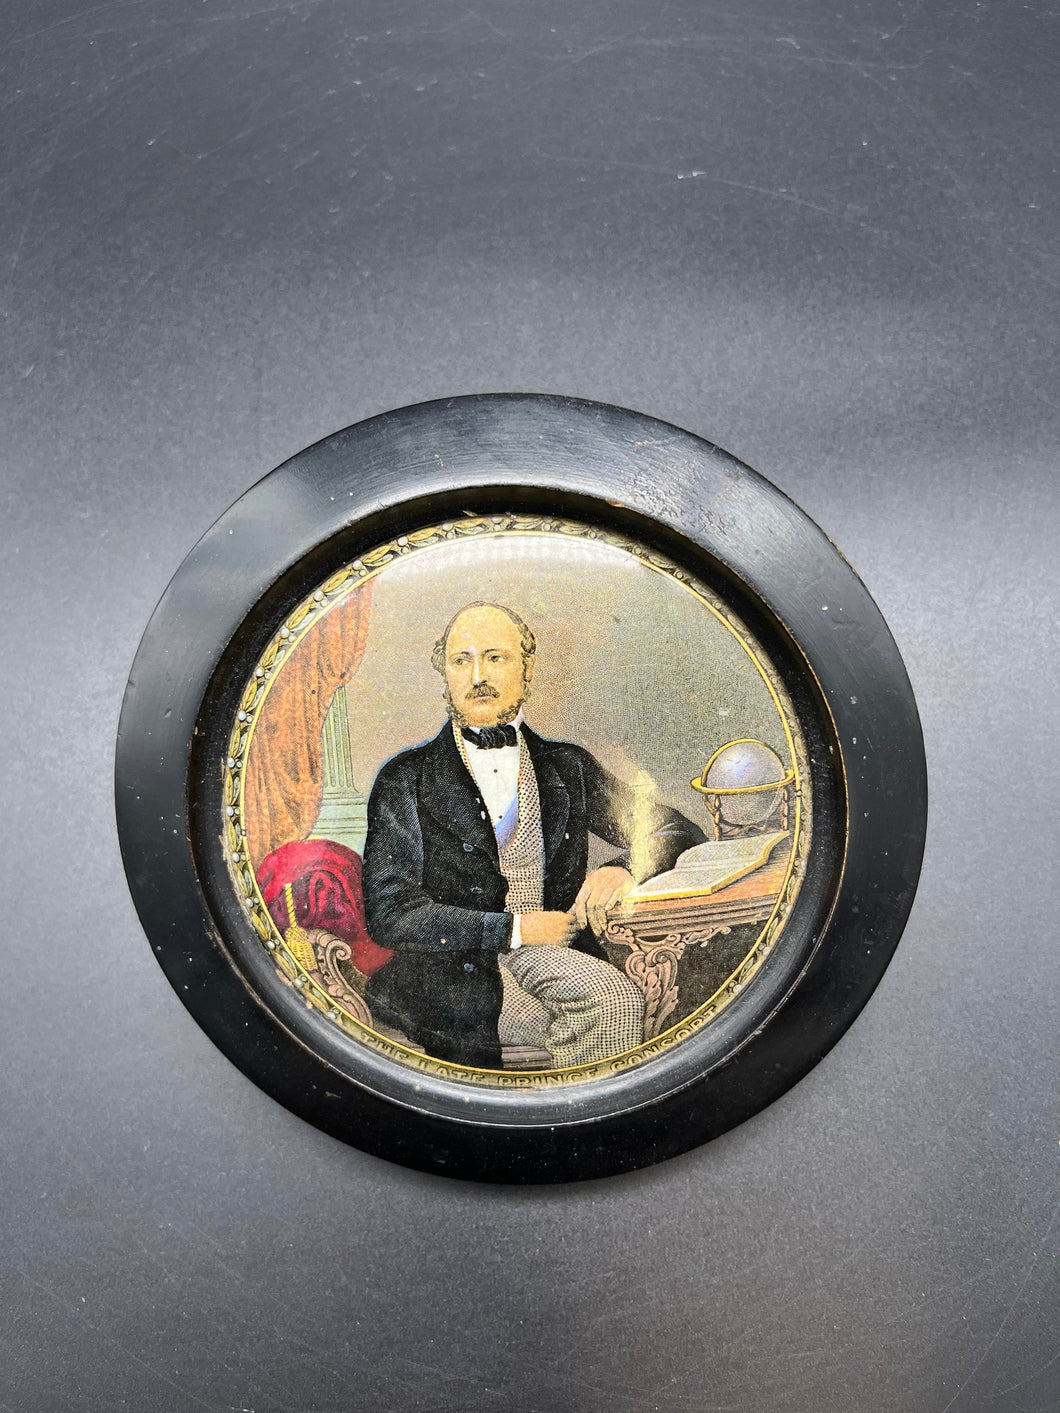 Prattware Printed Pot Lid Mounted in Frame - The Late Prince Consort